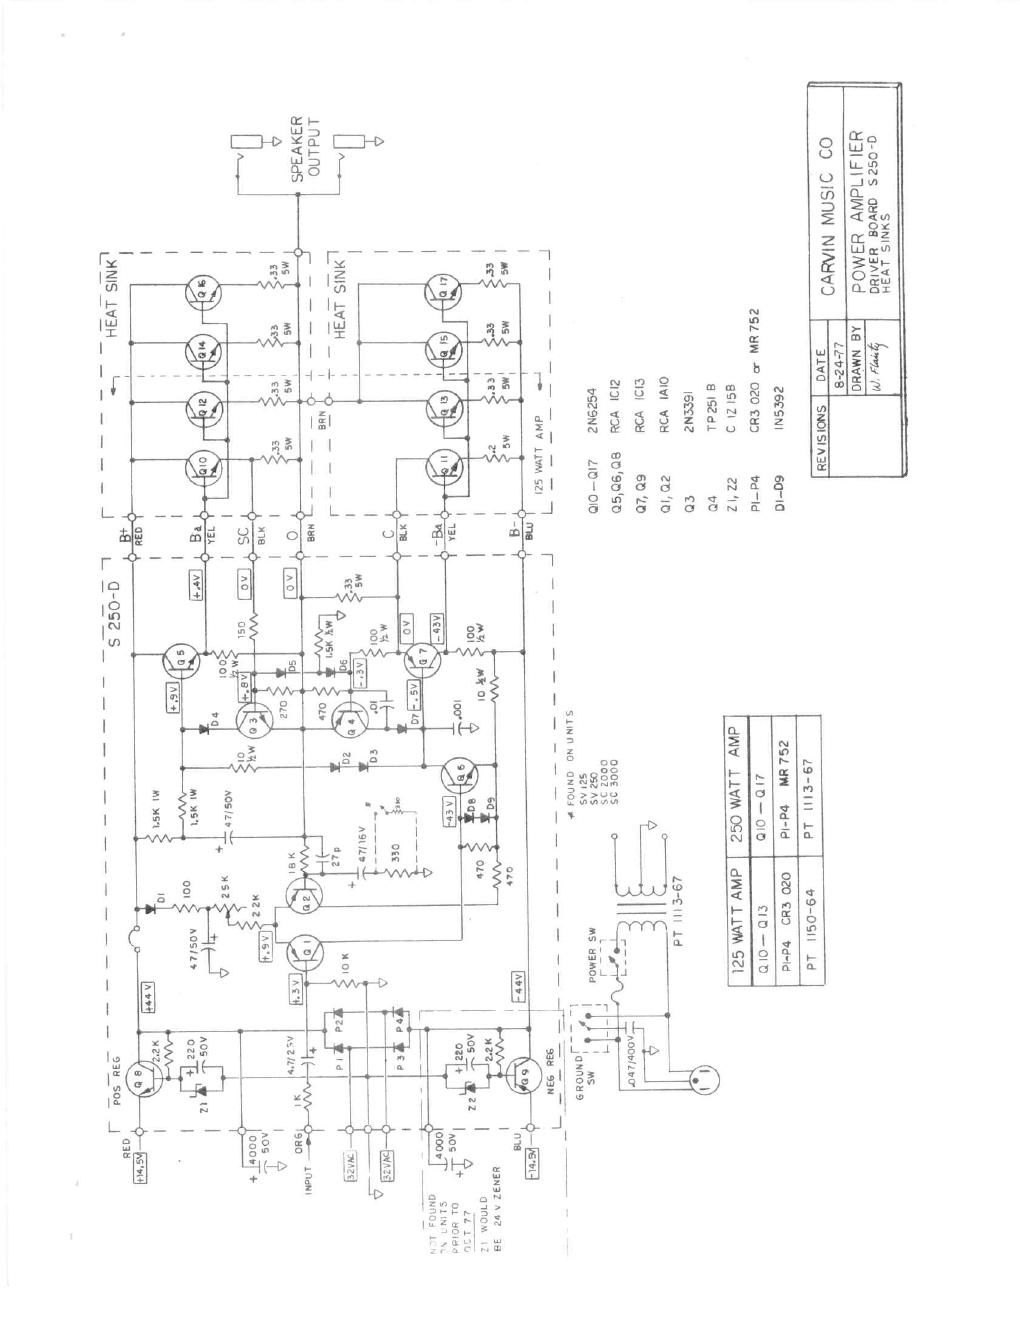 carvin sc sv series s250 d power amp schematic